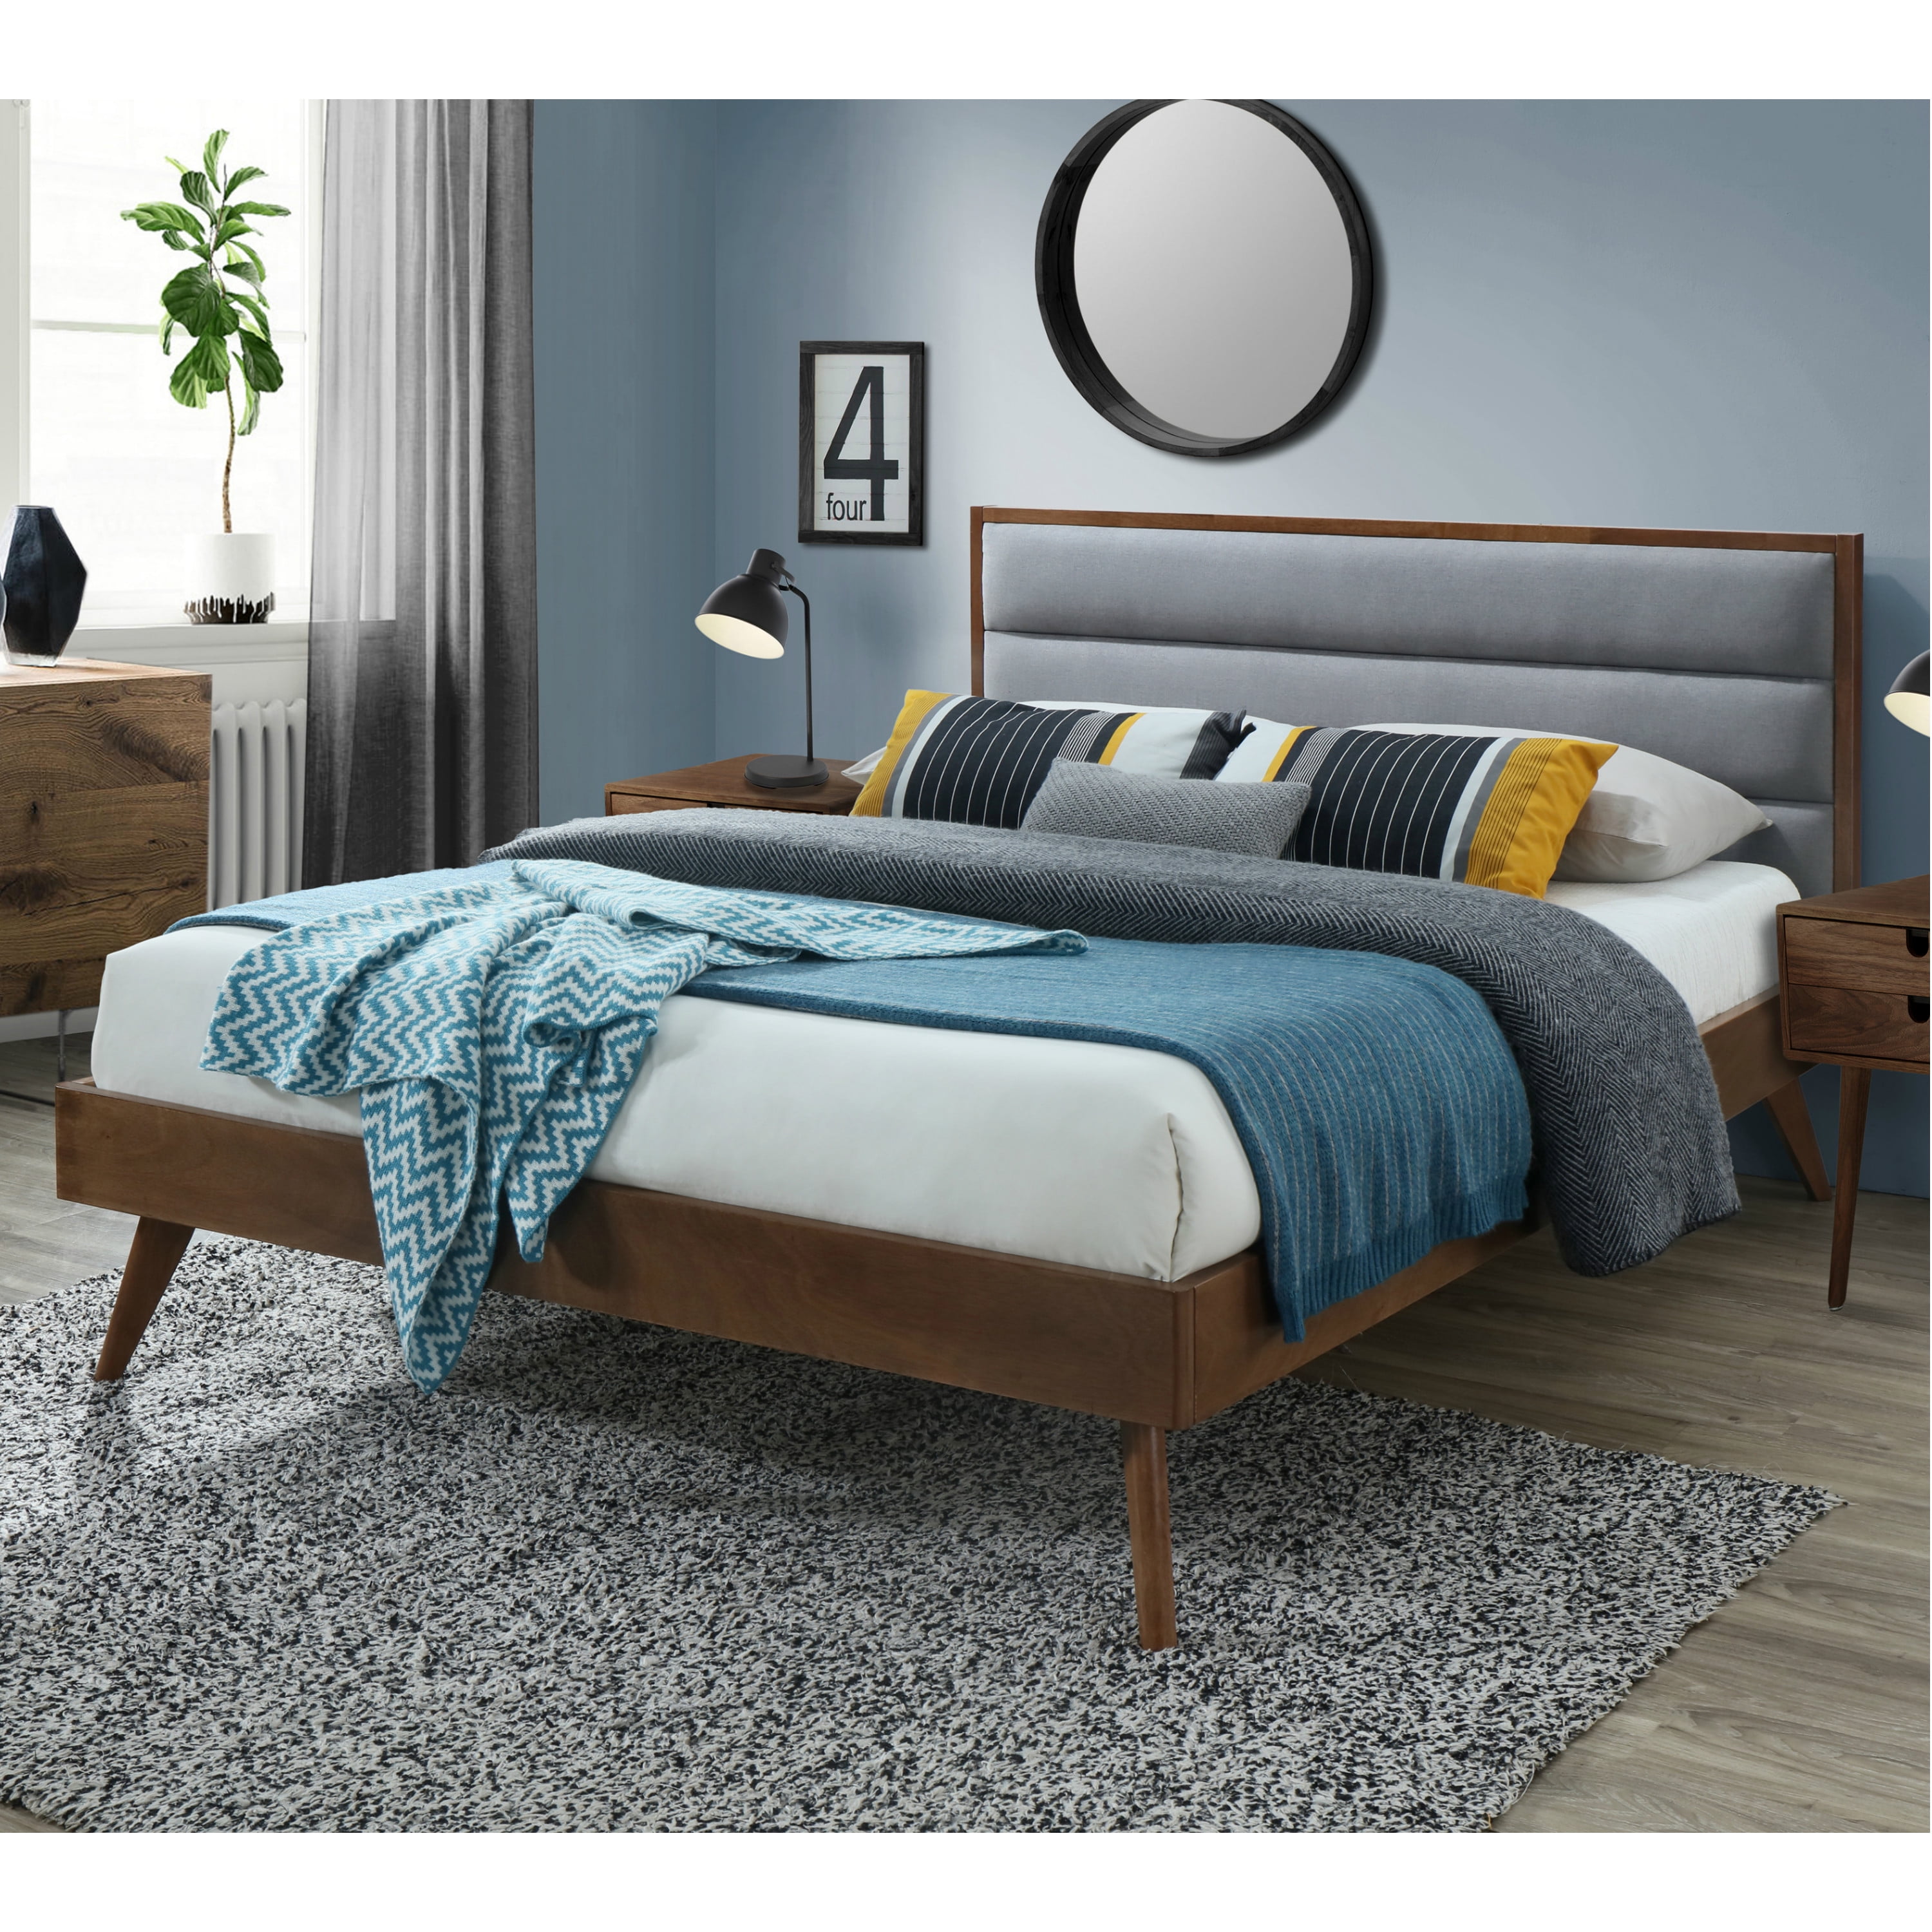 DG Casa Orlando Mid Century Modern Platfrom Bed Frame with Tufted